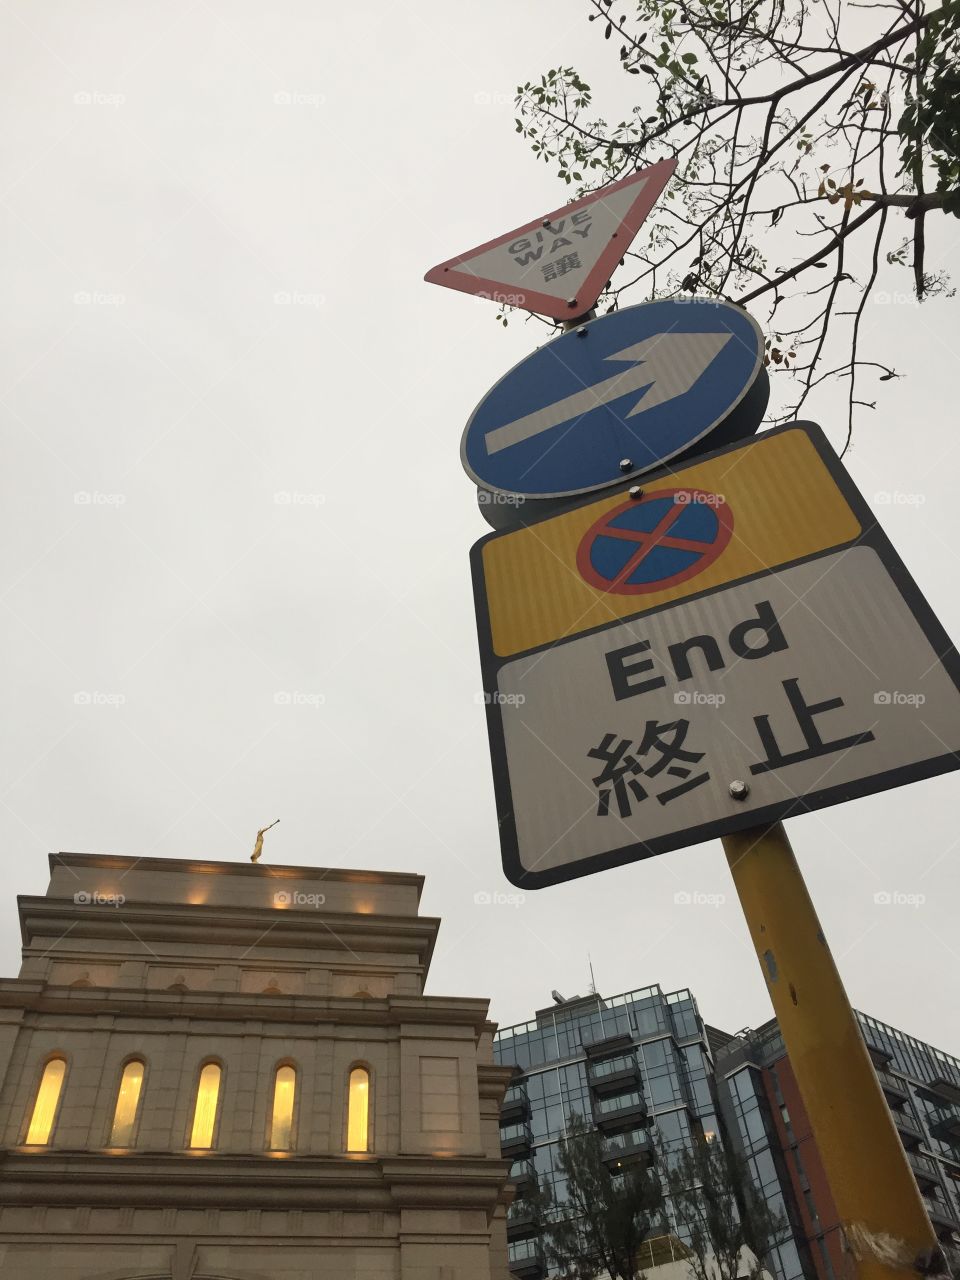 Give Way to The Holy Temple before The End. The Church of Jesus Christ of Latter-Day Saints, Hong Kong Temple. Hong Kong, China. Chelsea Merkley Photos. Copyright Chelsea Merkley Photography 2019. 